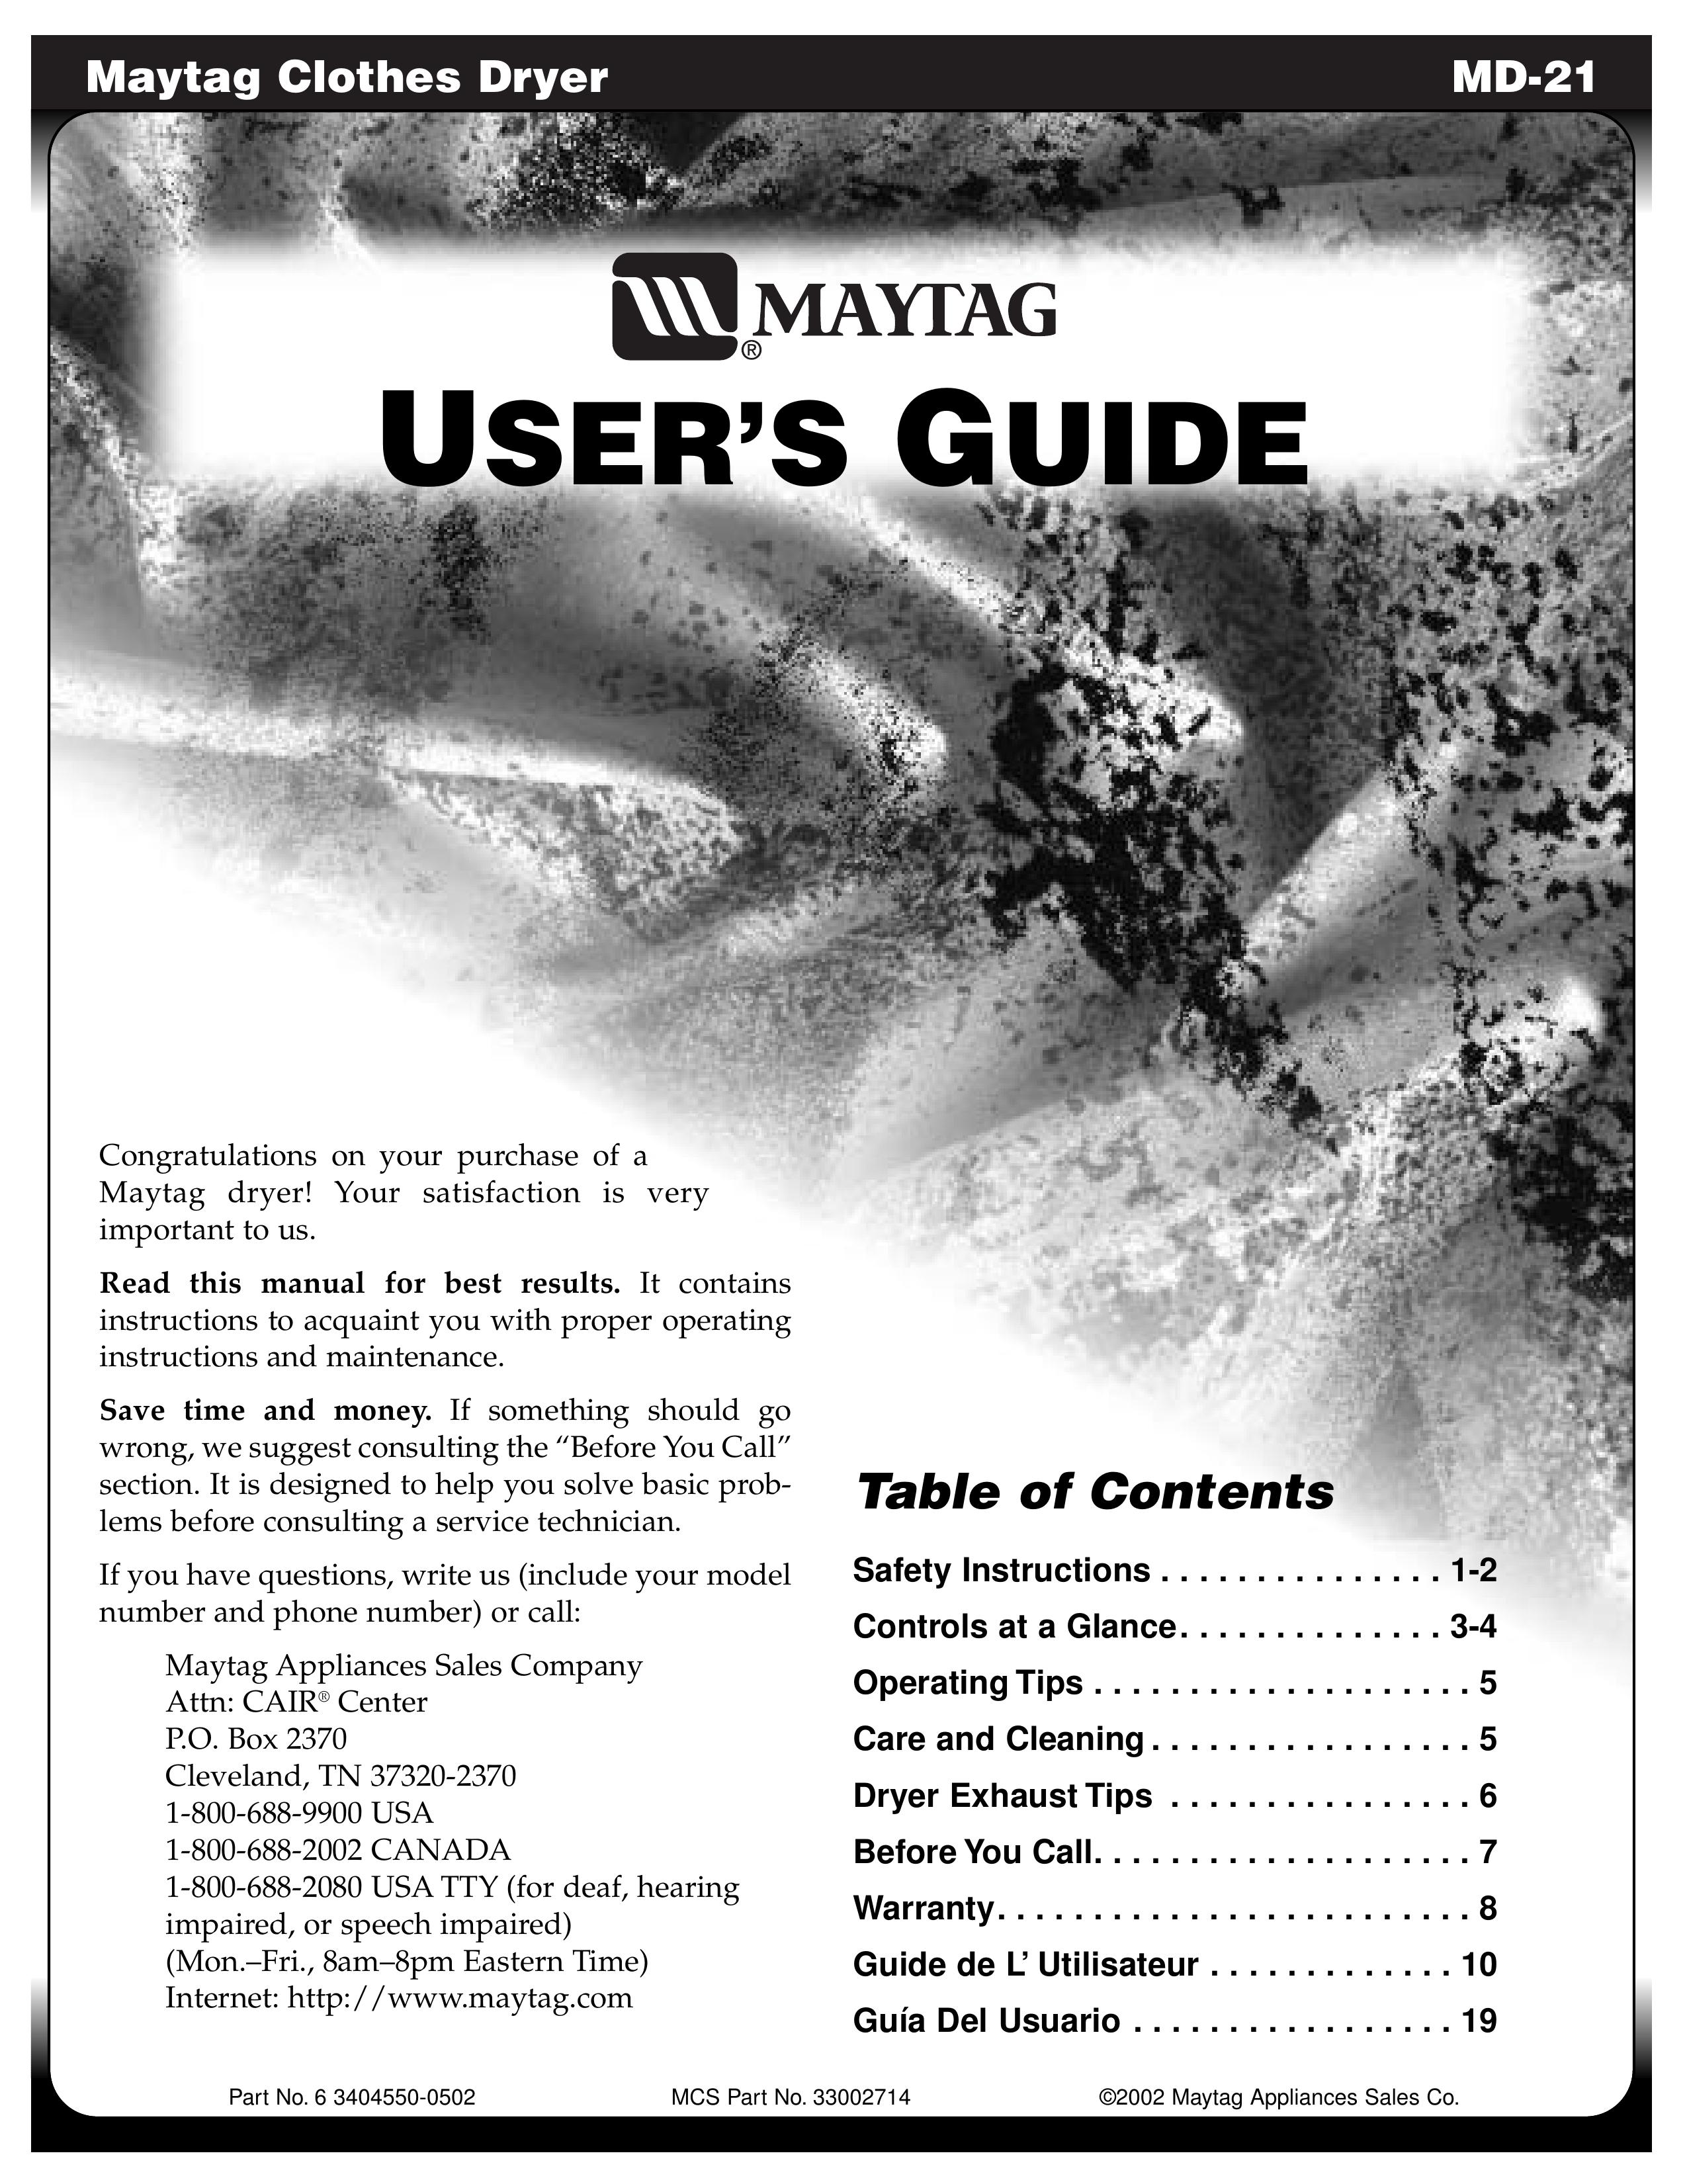 Maytag MD-21 Clothes Dryer User Manual